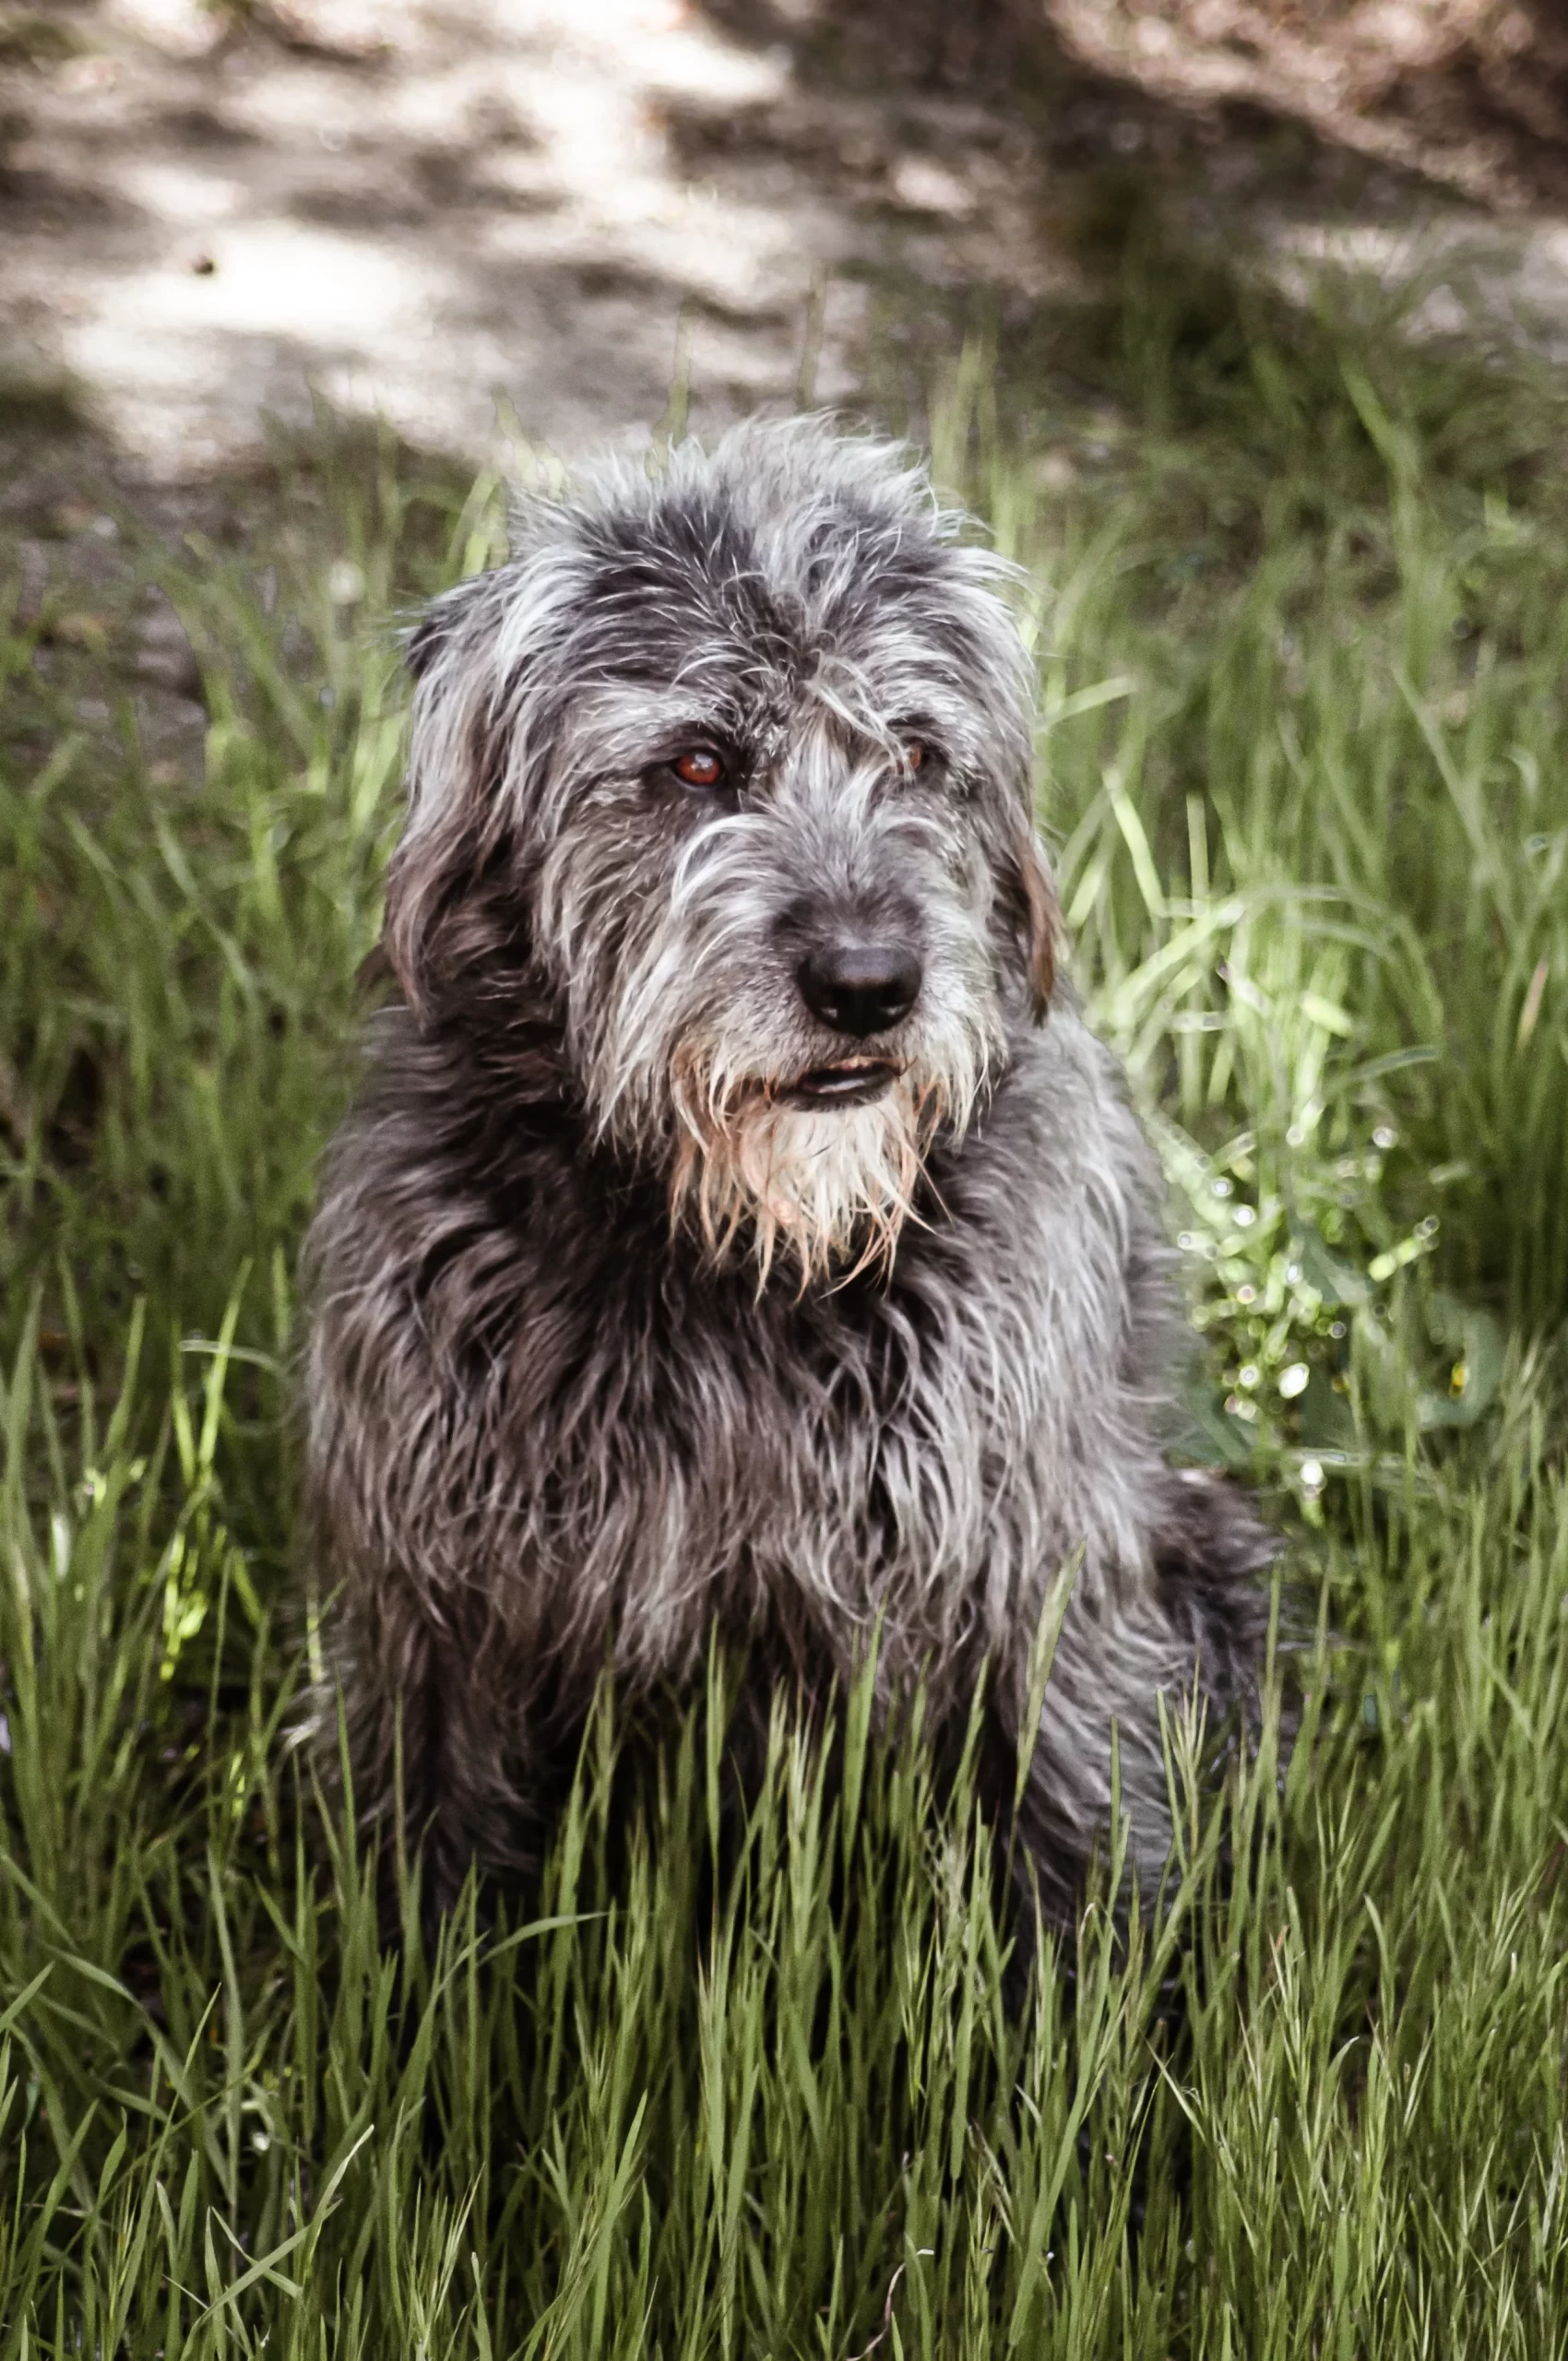 Alpedrete, España Published on May 17, 2020 NIKON CORPORATION, NIKON D90 Free to use under the Unsplash License Dog sitting in the grass